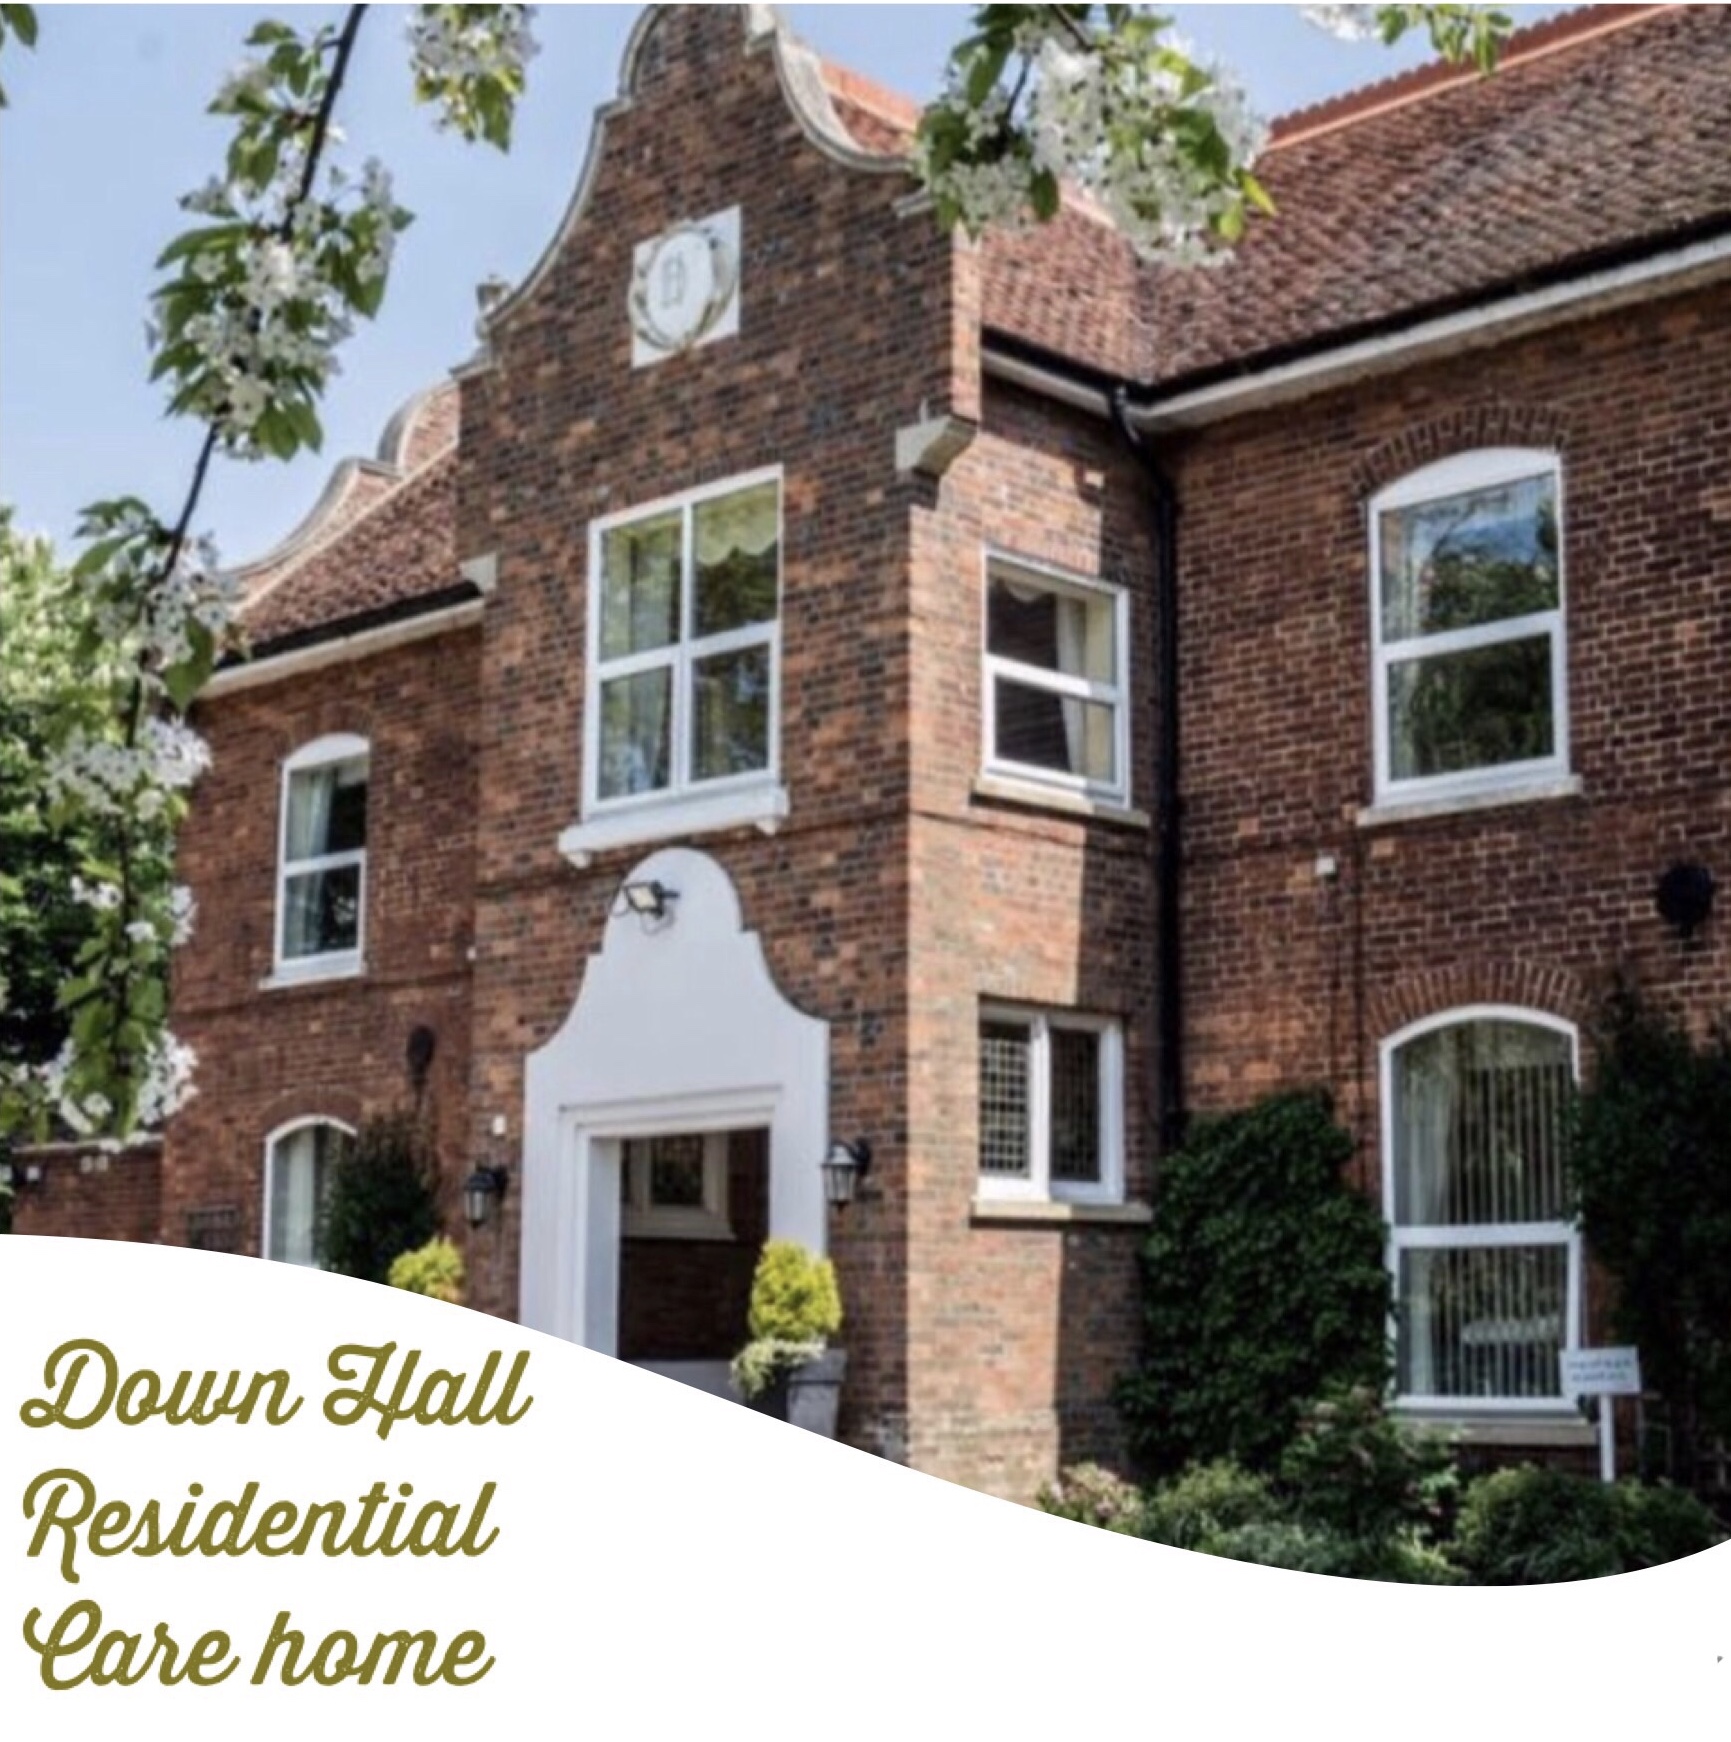 Down Hall Residential Home